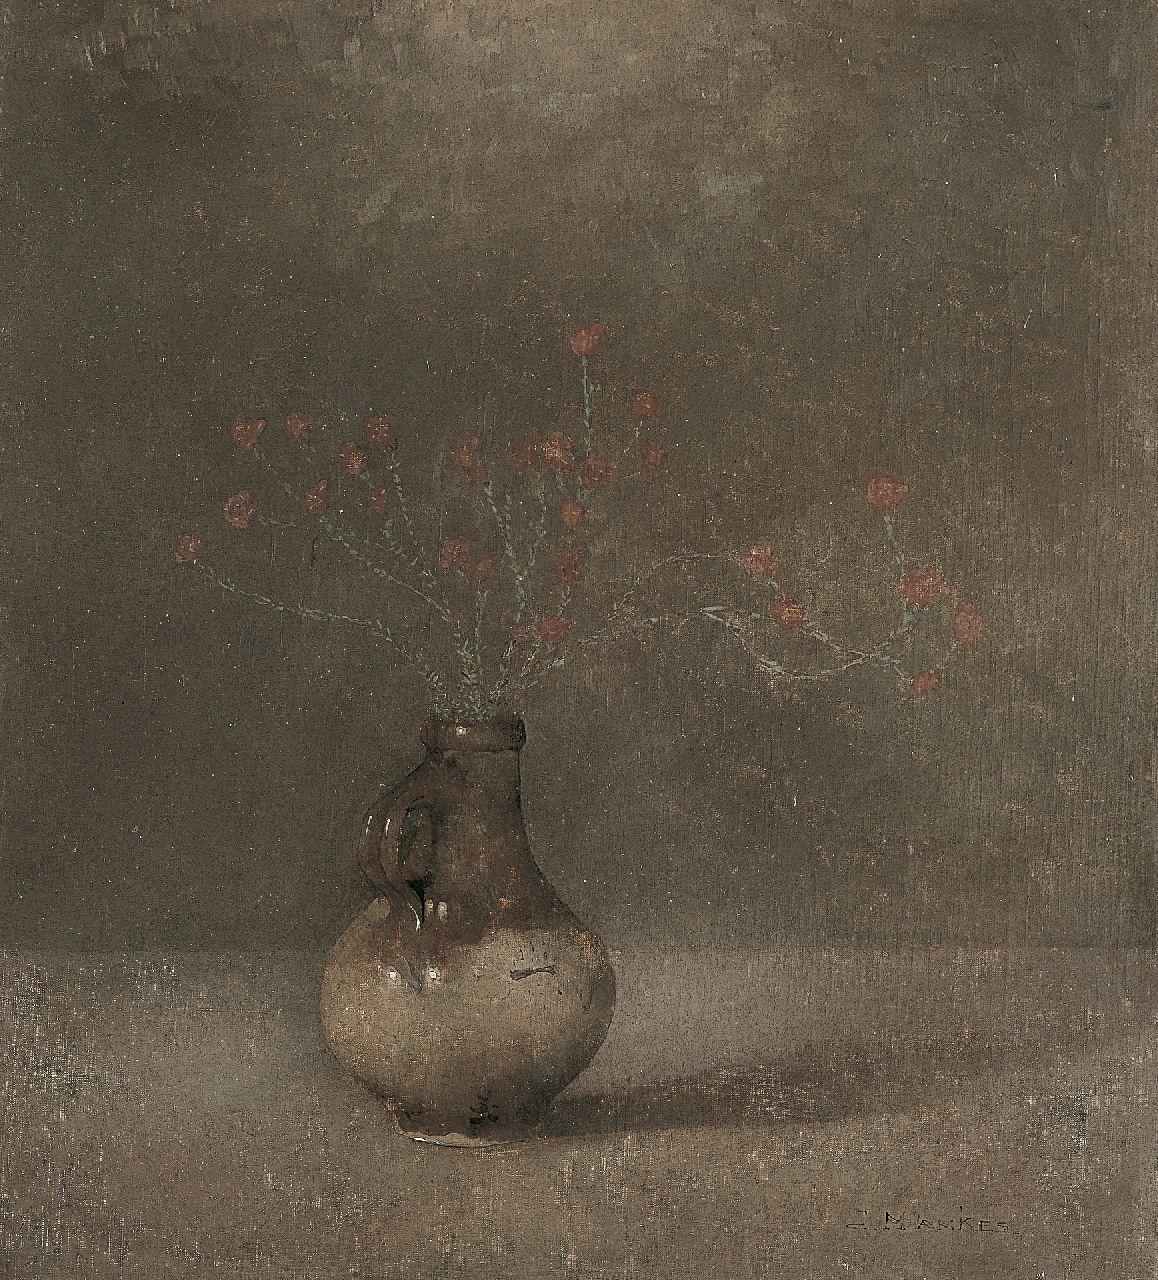 Mankes J.  | Jan Mankes, A jar with bottle heath, oil on canvas 40.5 x 36.5 cm, signed l.r. and dated 1911